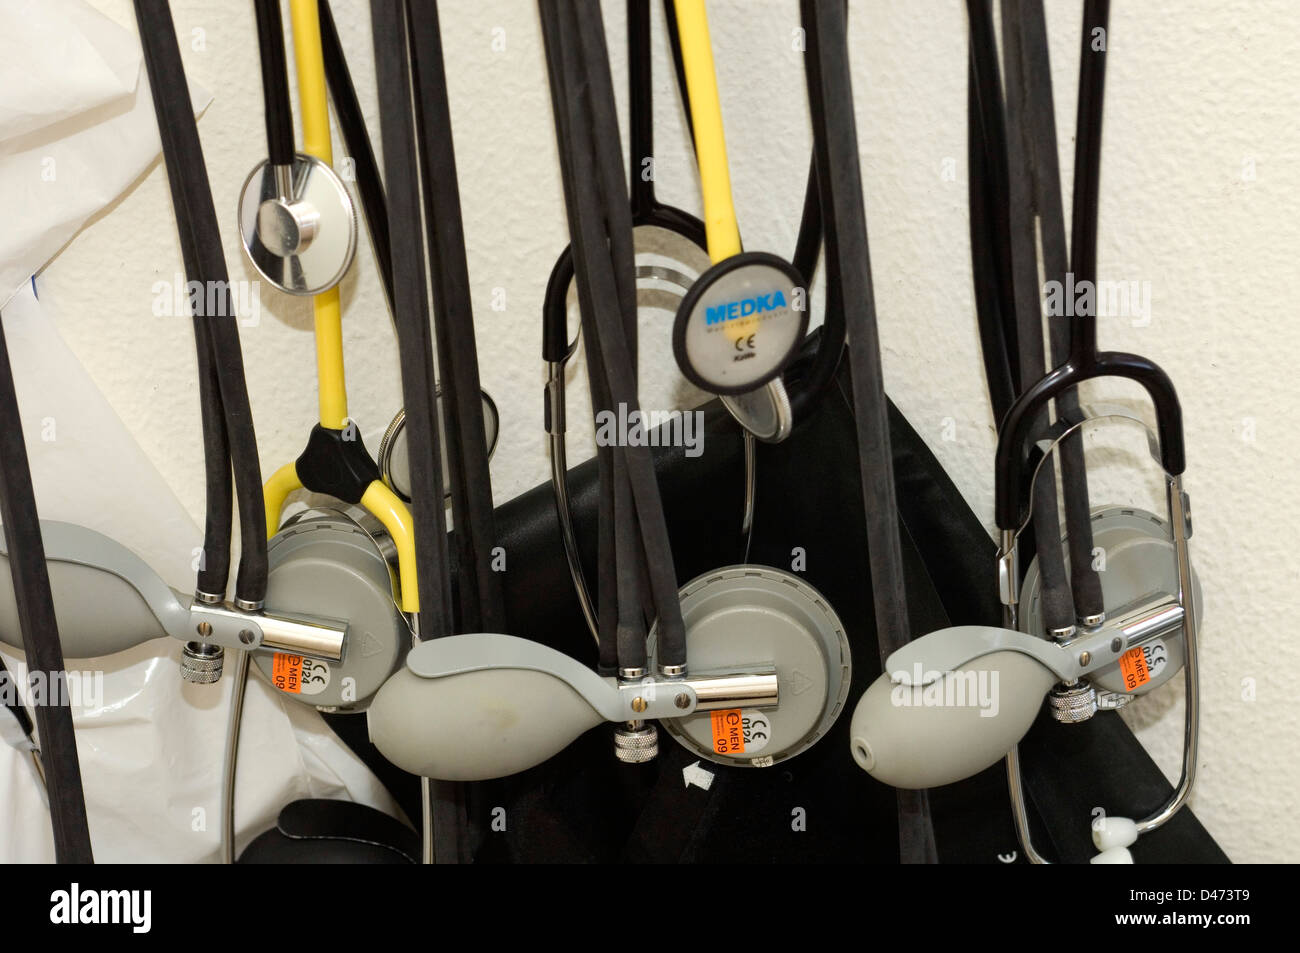 Stethoscopes all hung up in the equipment room. Stock Photo